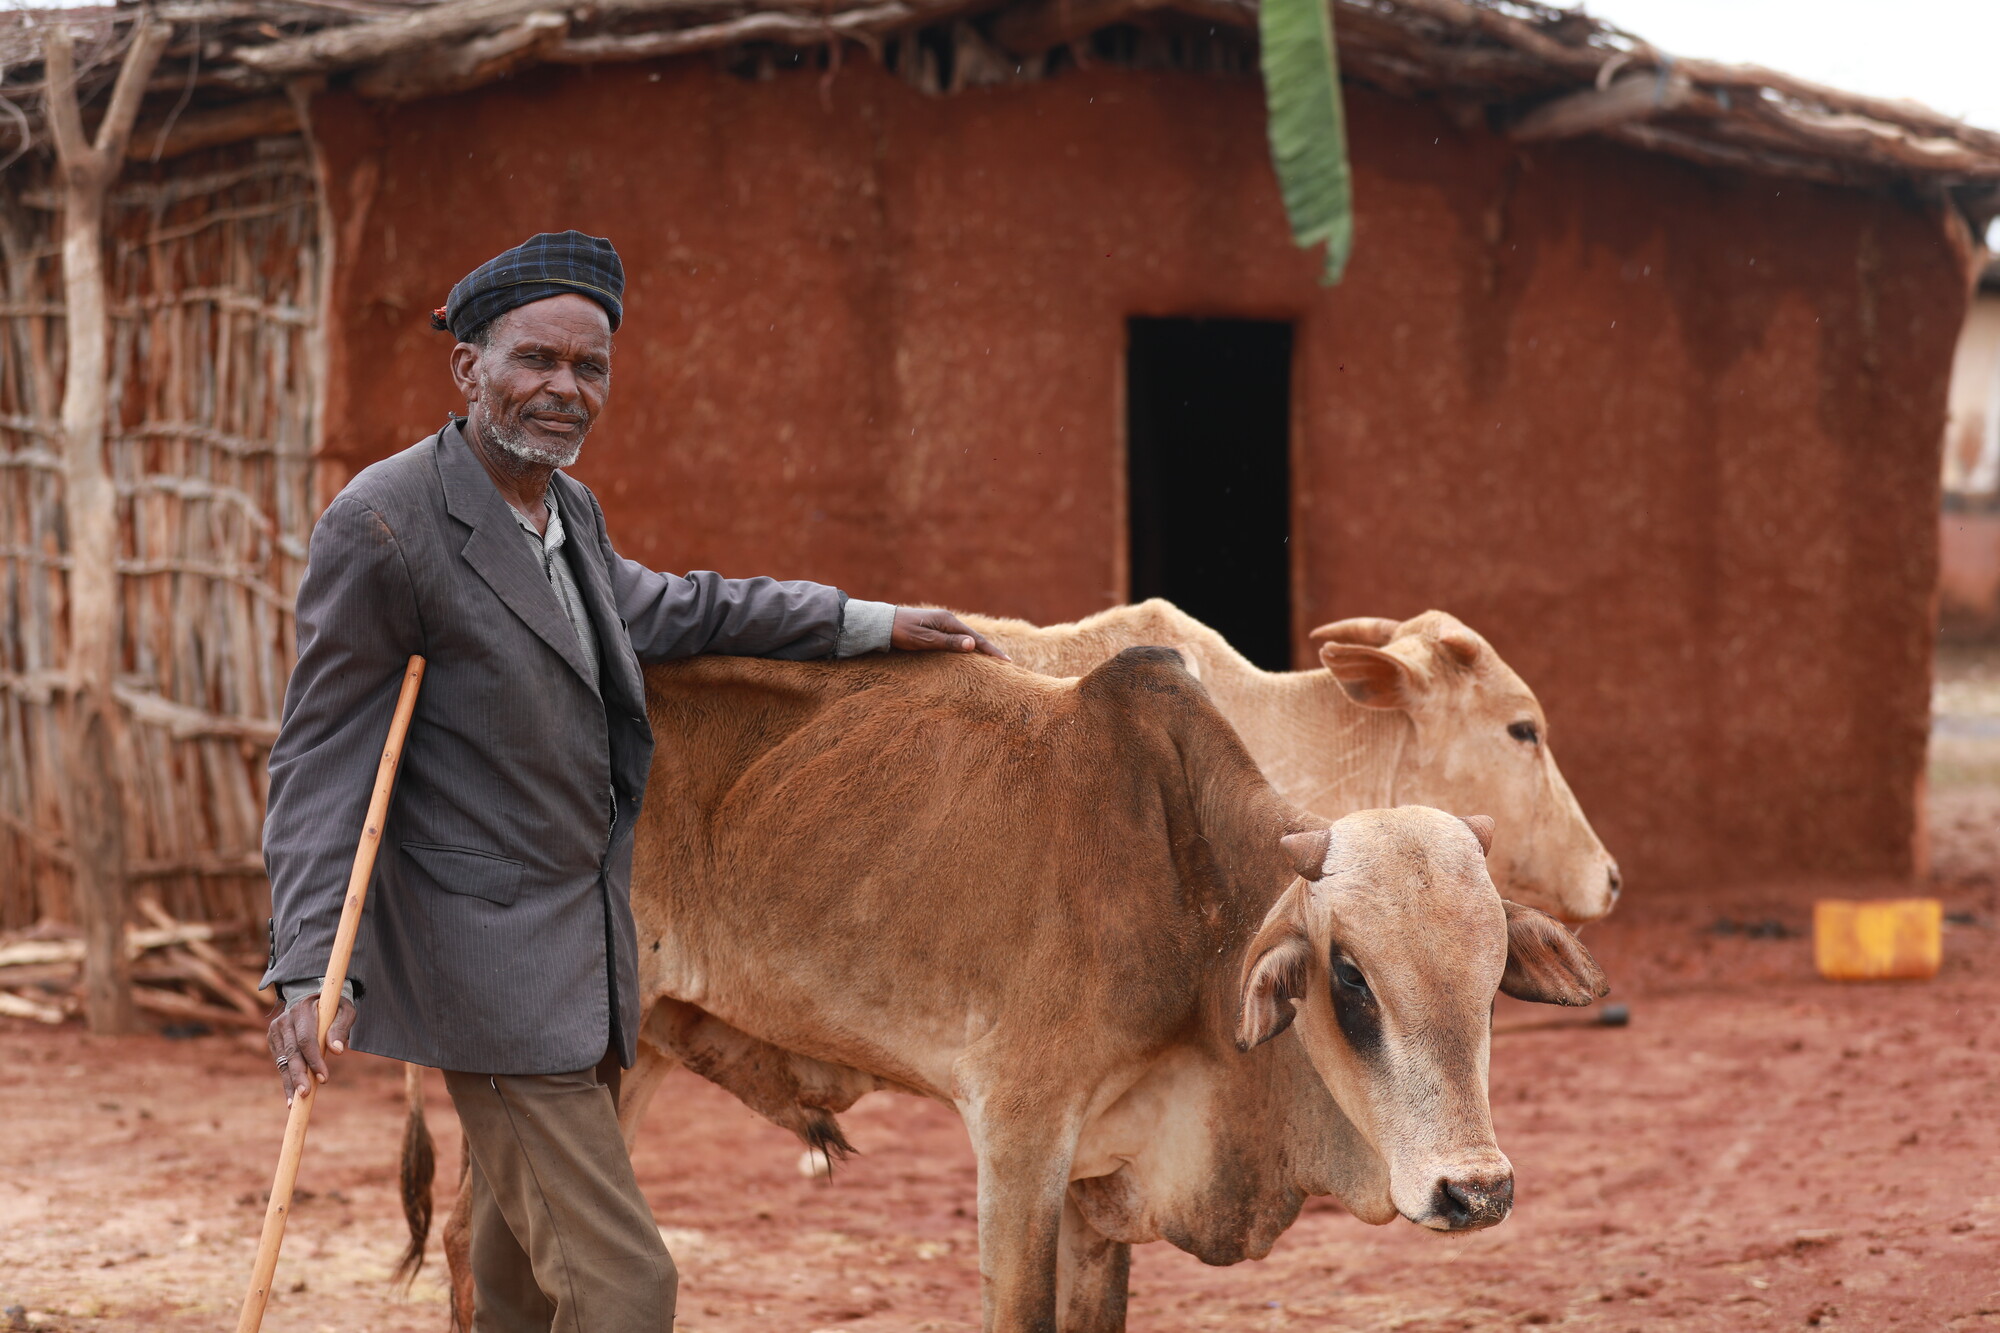  _81_https://www.helpage.org/silo/images/climate-change-ethiopia-livestock_2000x1333.jpg